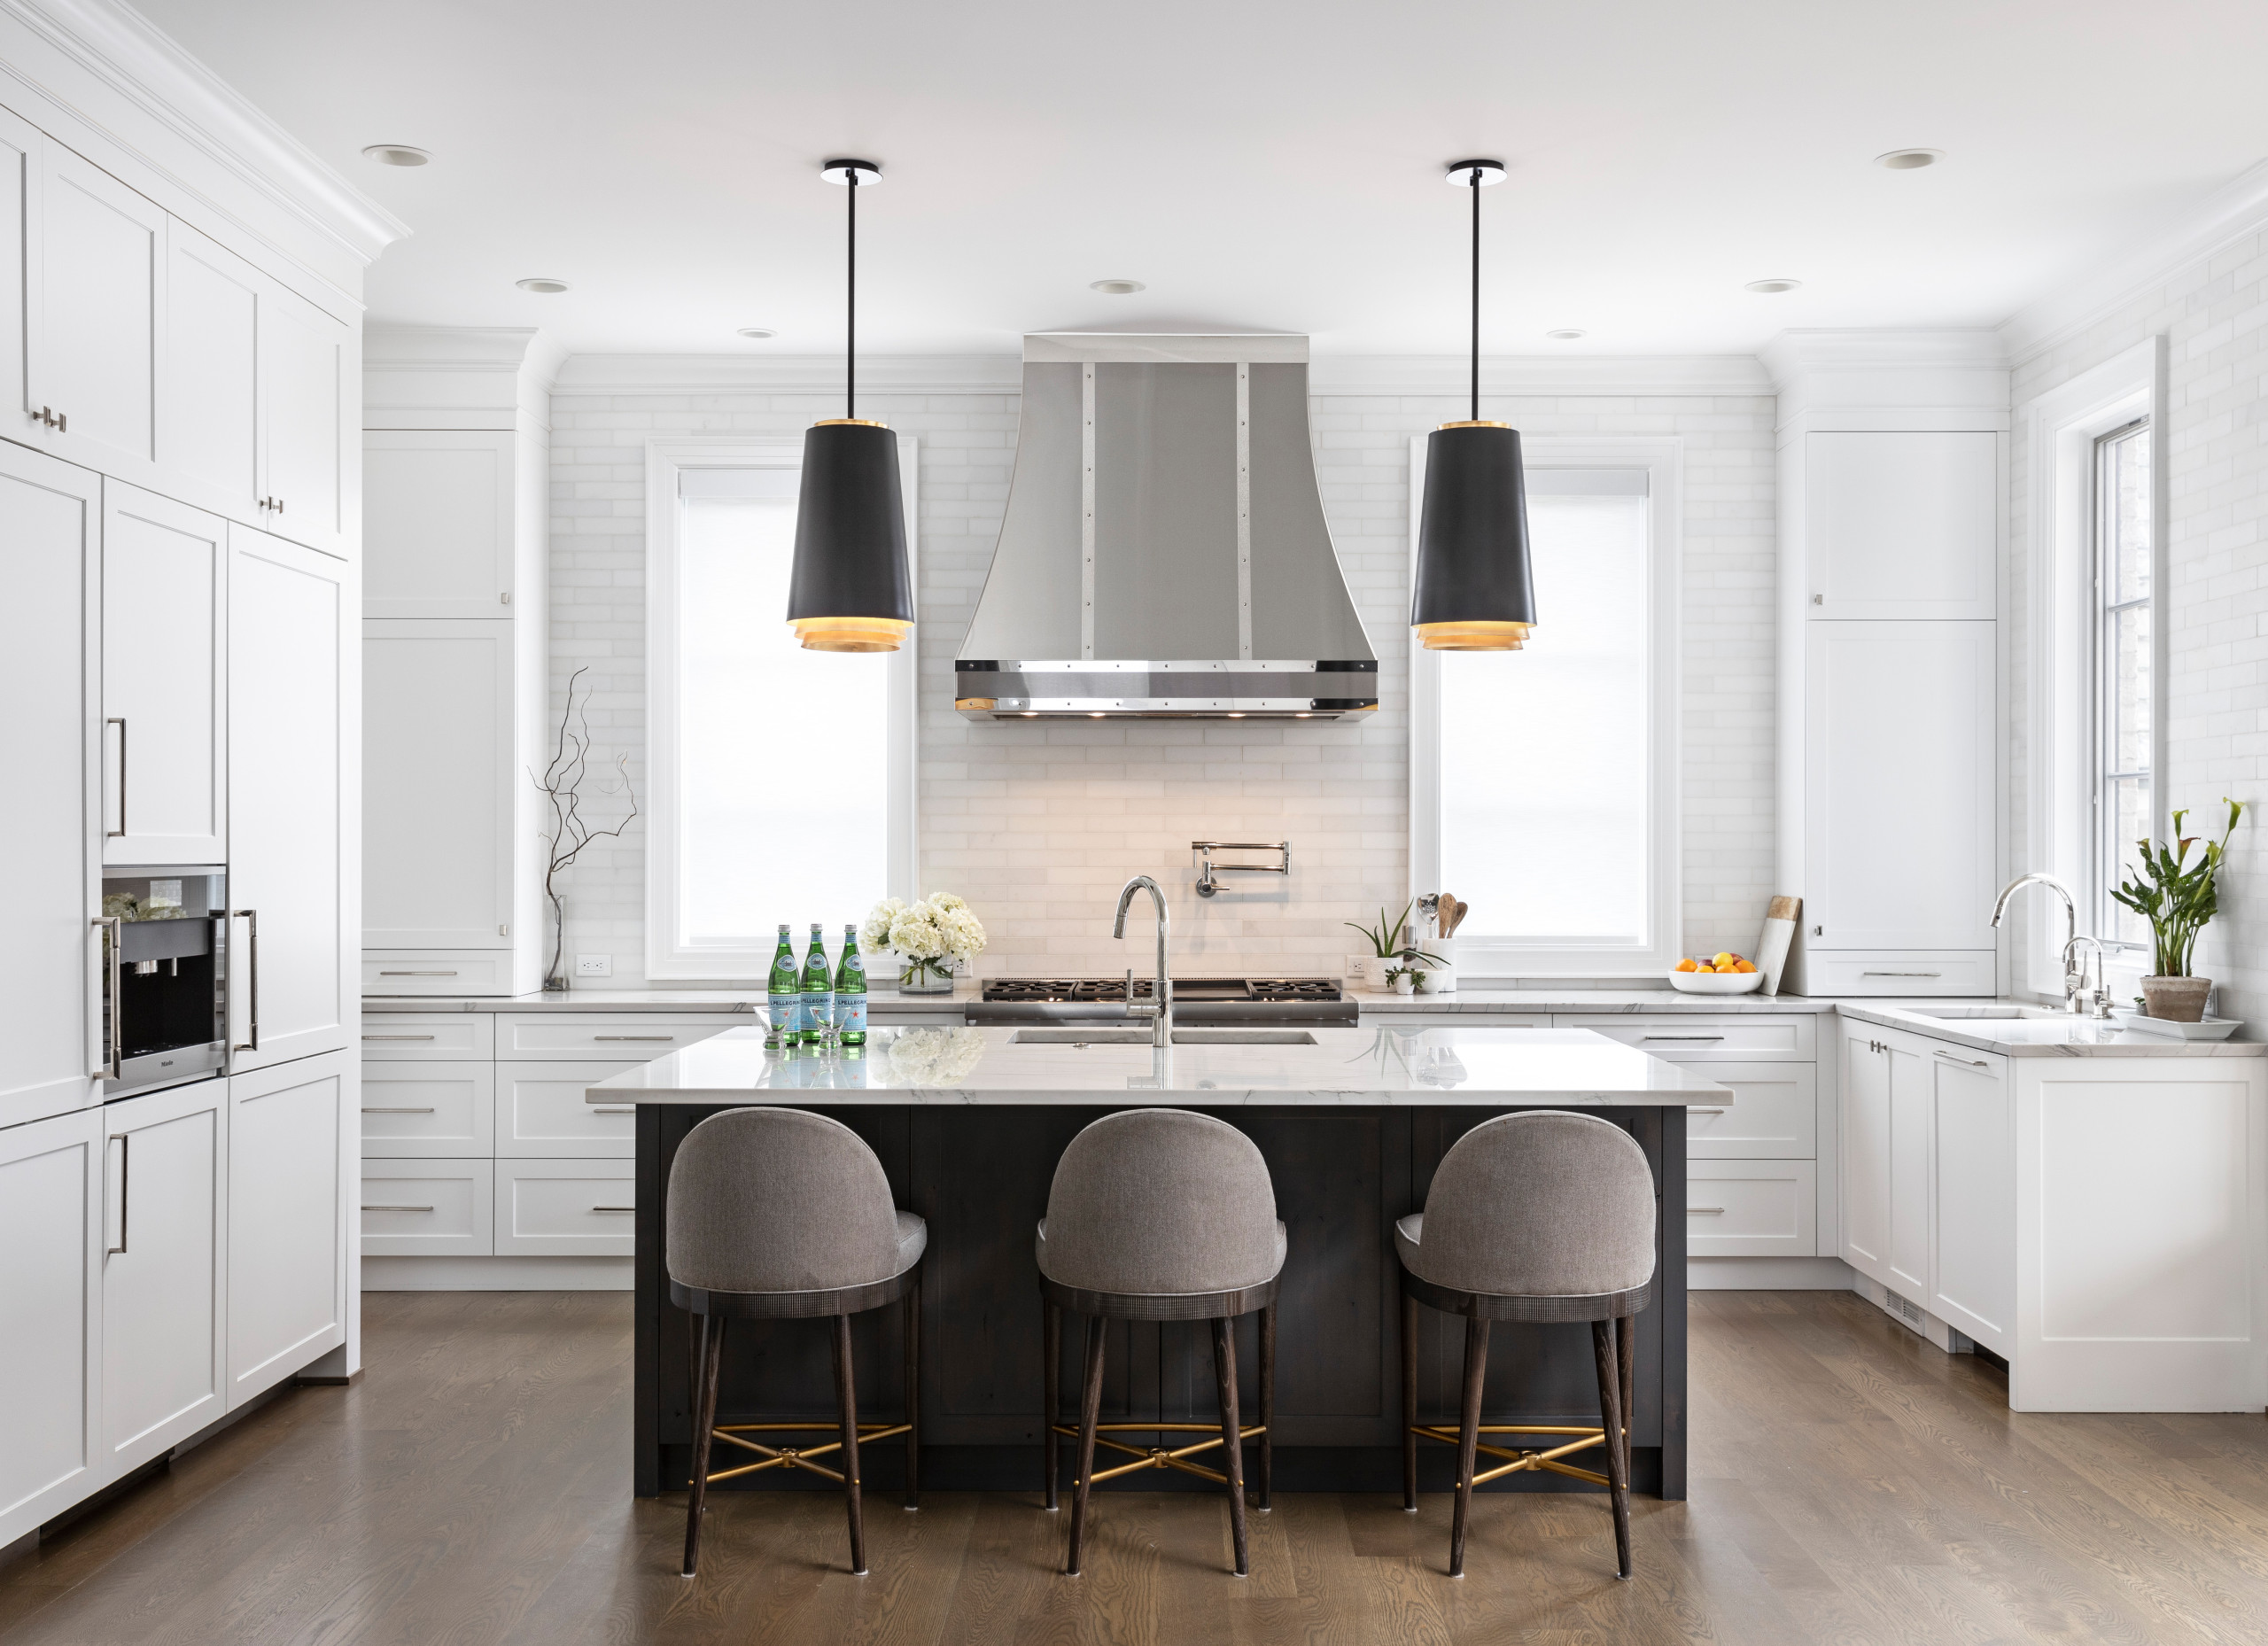 Serenity in the Kitchen. When working with an open floor plan, it’s essential to tie in these spaces with the rest of the Home. The custom metal hood becomes the star of the show, and you can be sure